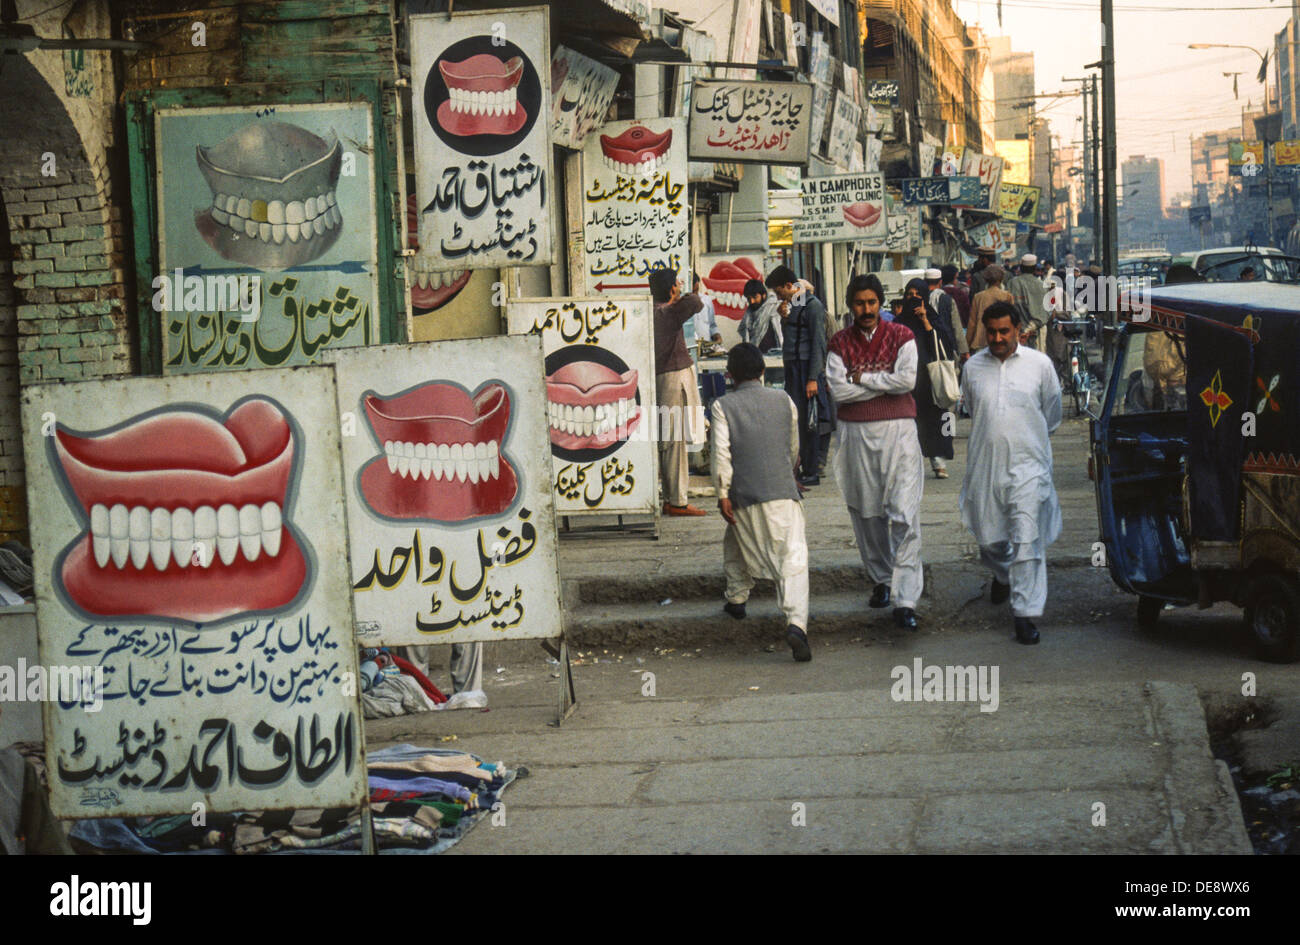 Dentist signs along a street in Pakistan Stock Photo